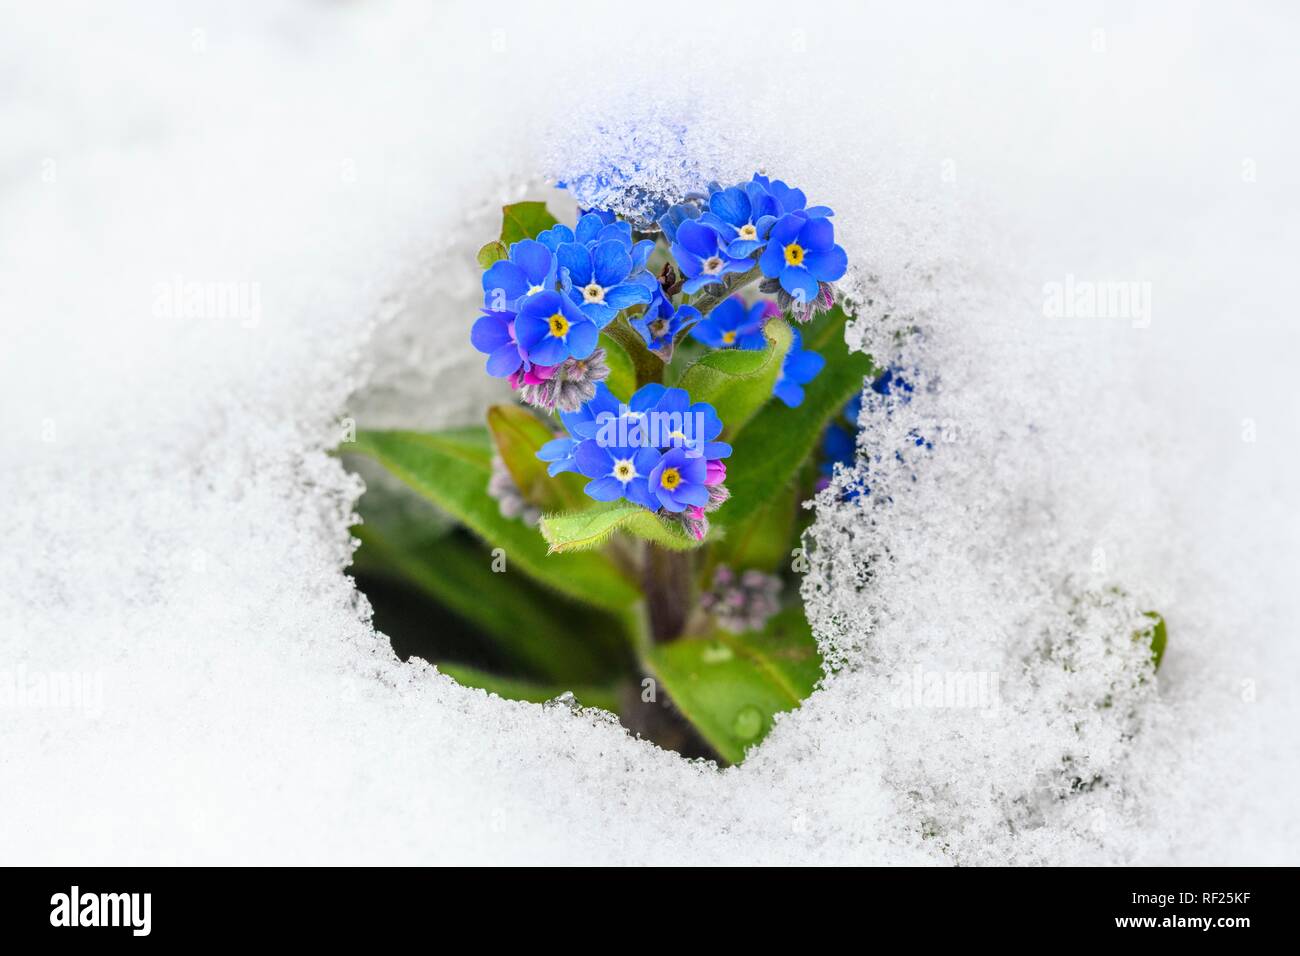 Forget-me-not (Myosotis sylvatica) in the snow, Germany Stock Photo